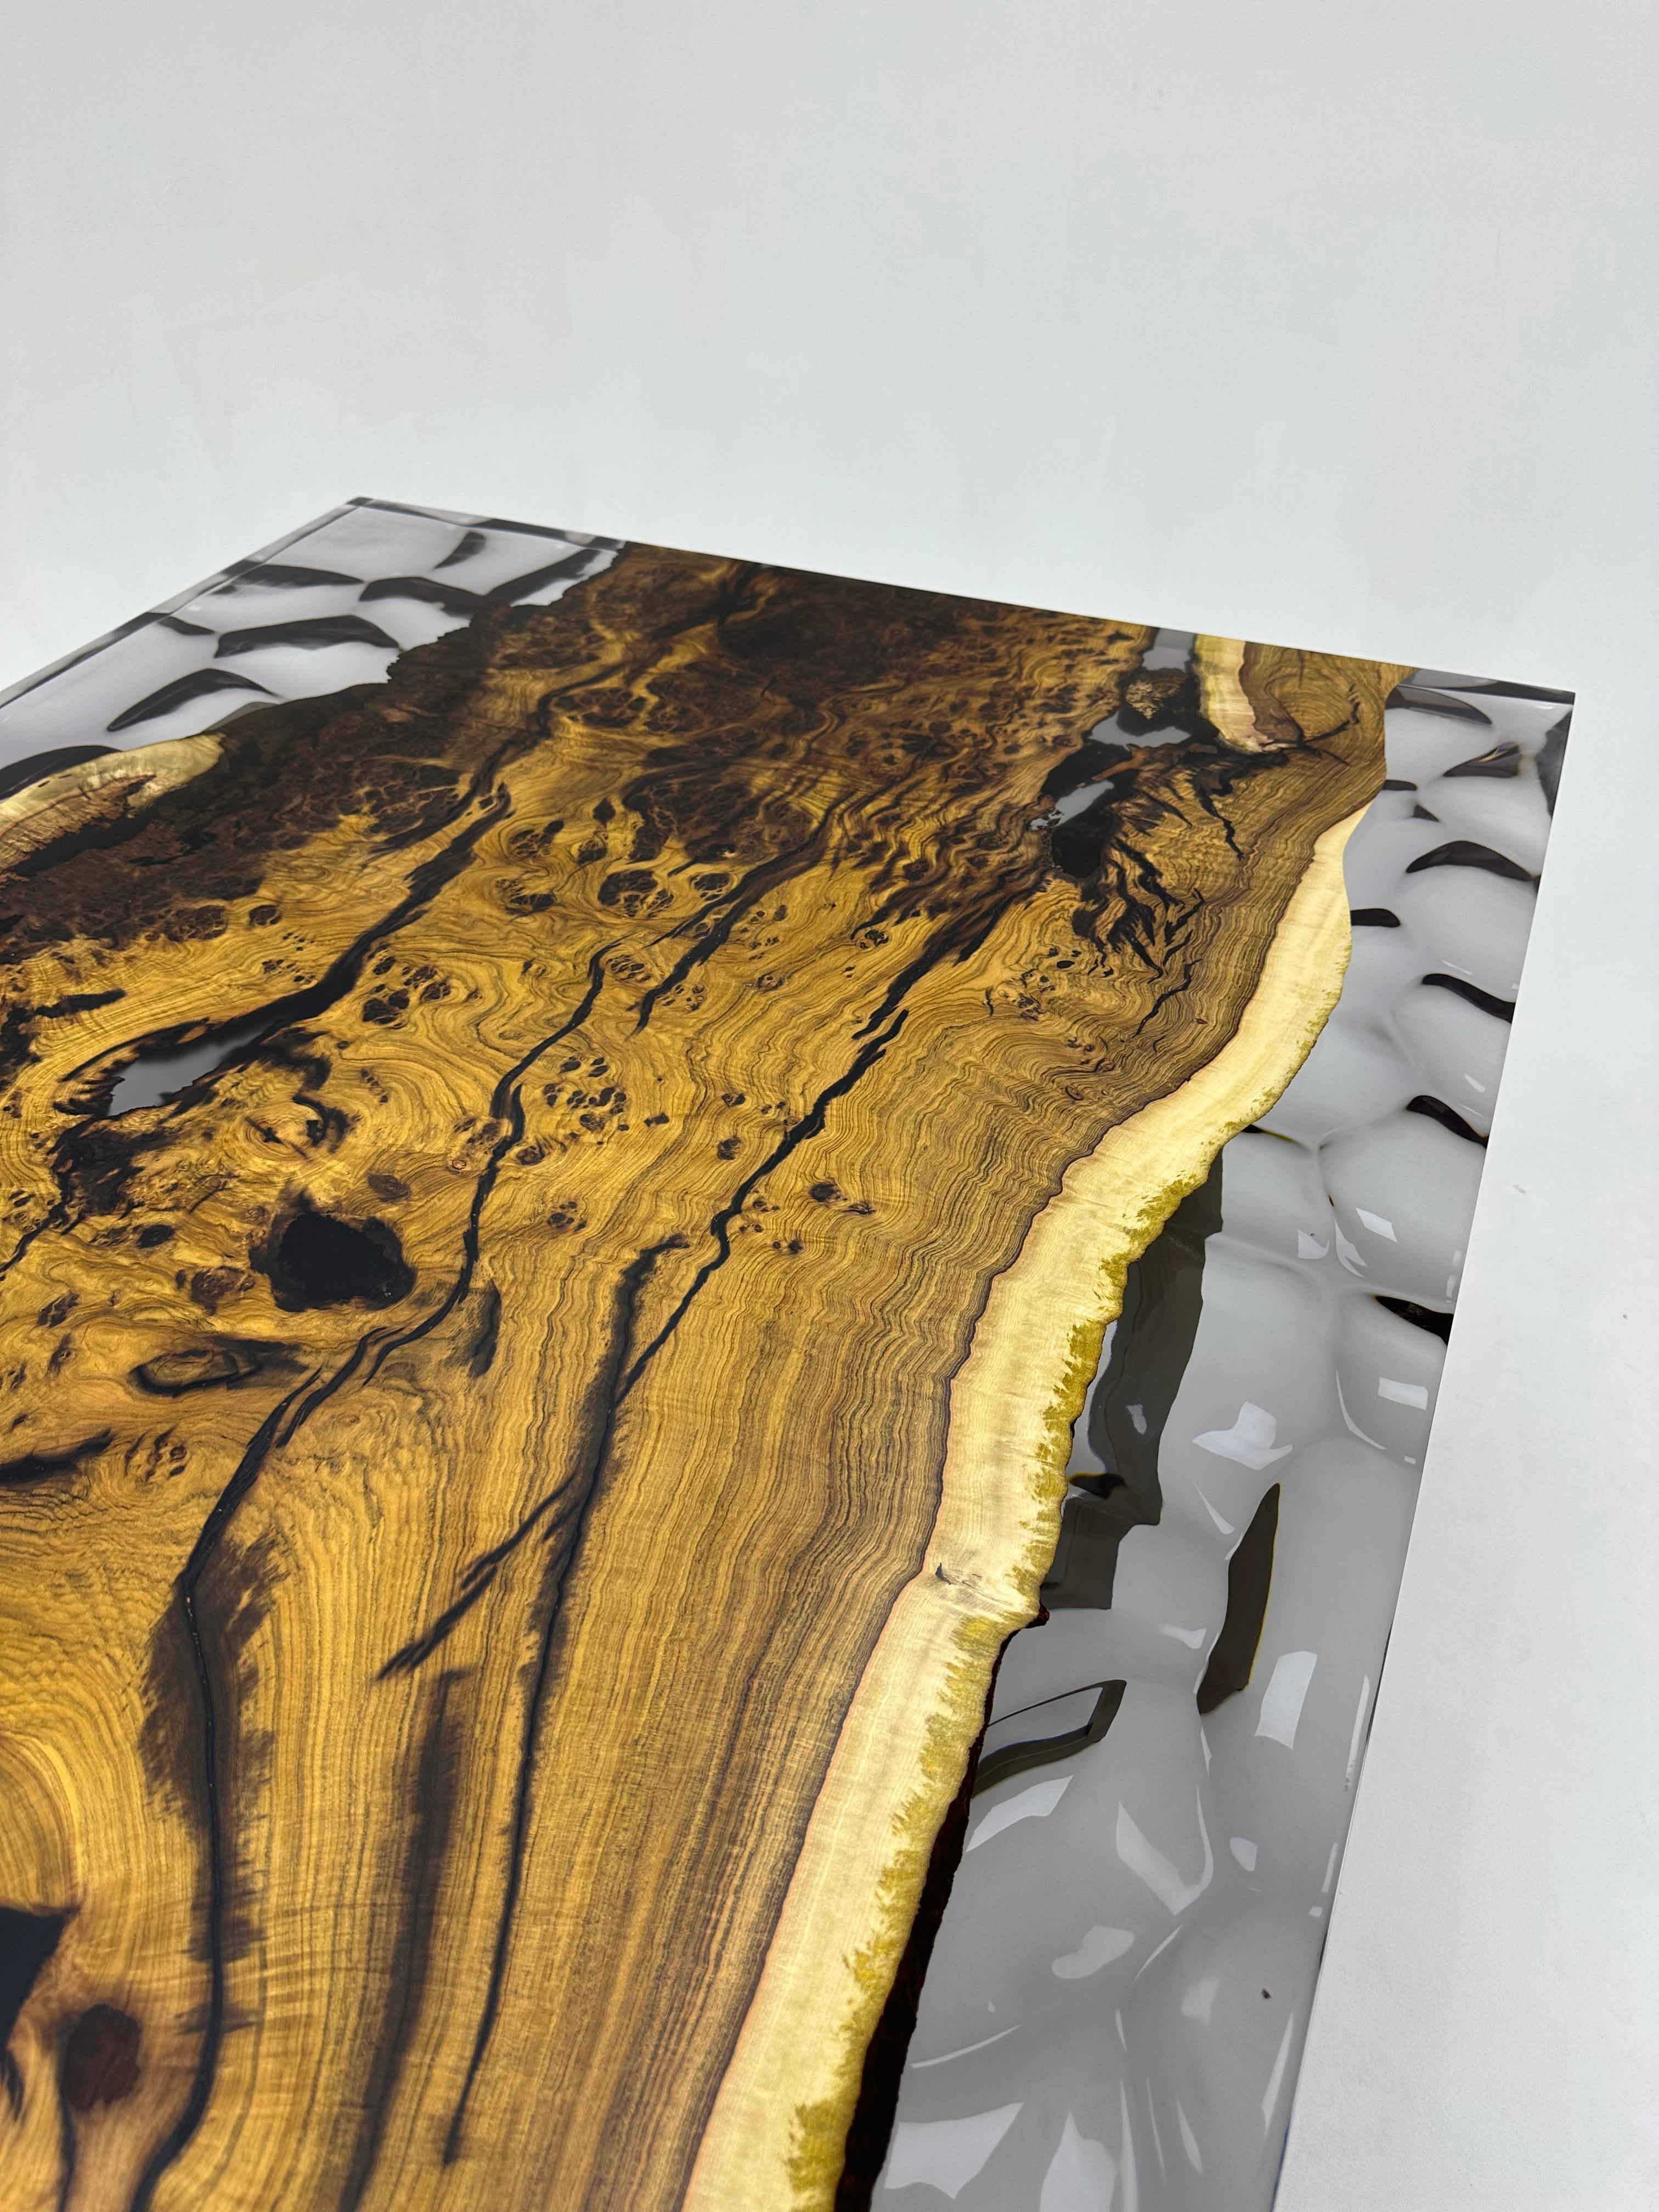 Turkish Wave Design Ancient Hackberry Wood Epoxy Resin Table For Sale